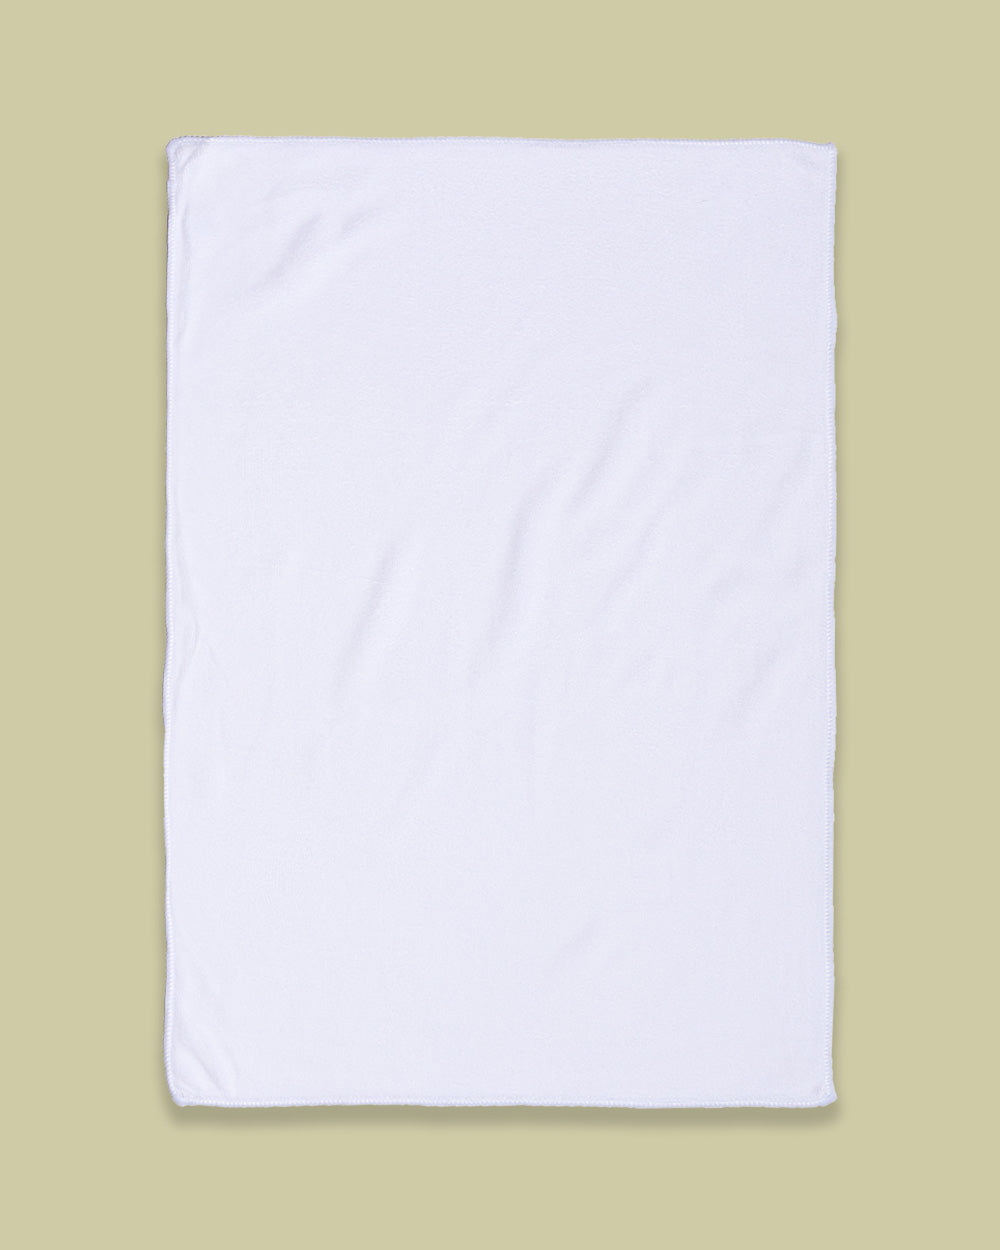 Rally Towel Vertical (SIZE 11"X17")